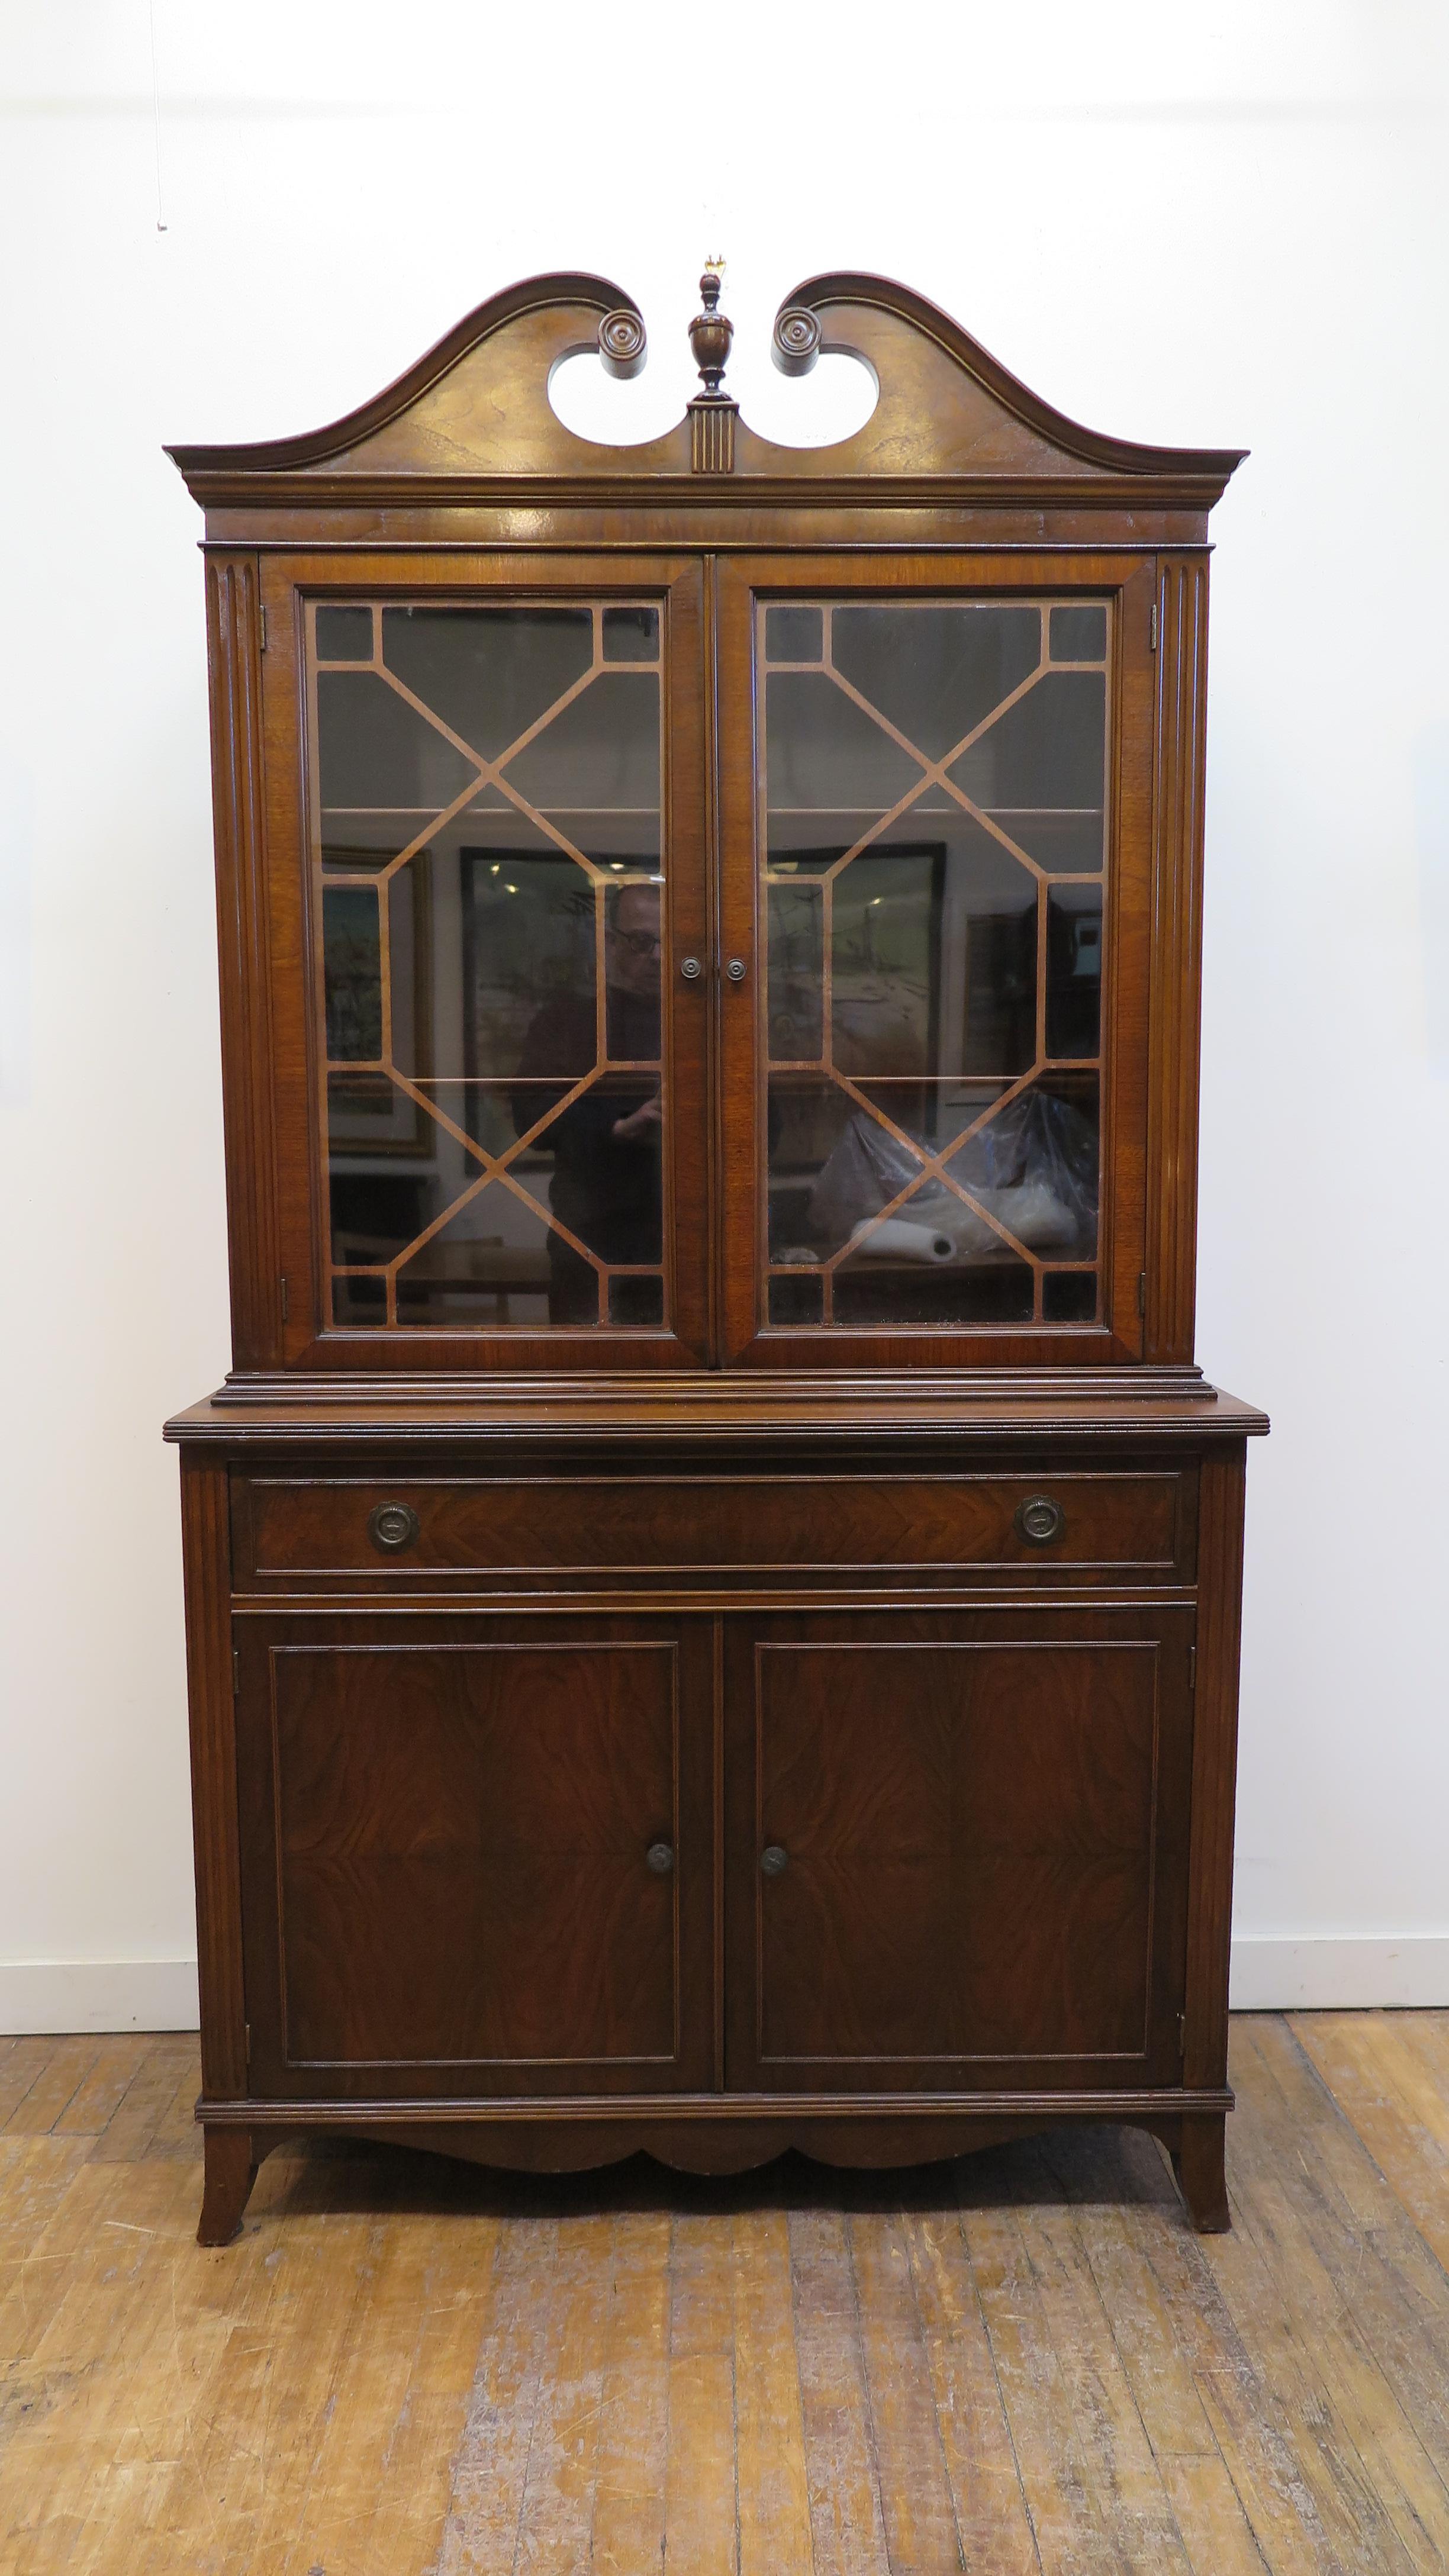 Mahogany Sheraton style display cabinet. Toped with English Georgian cornice detail and center finial having glass doors display case with three shelfs, lower drawer and lower cabinet with two shelfs. Good condition traditional Sheraton Style